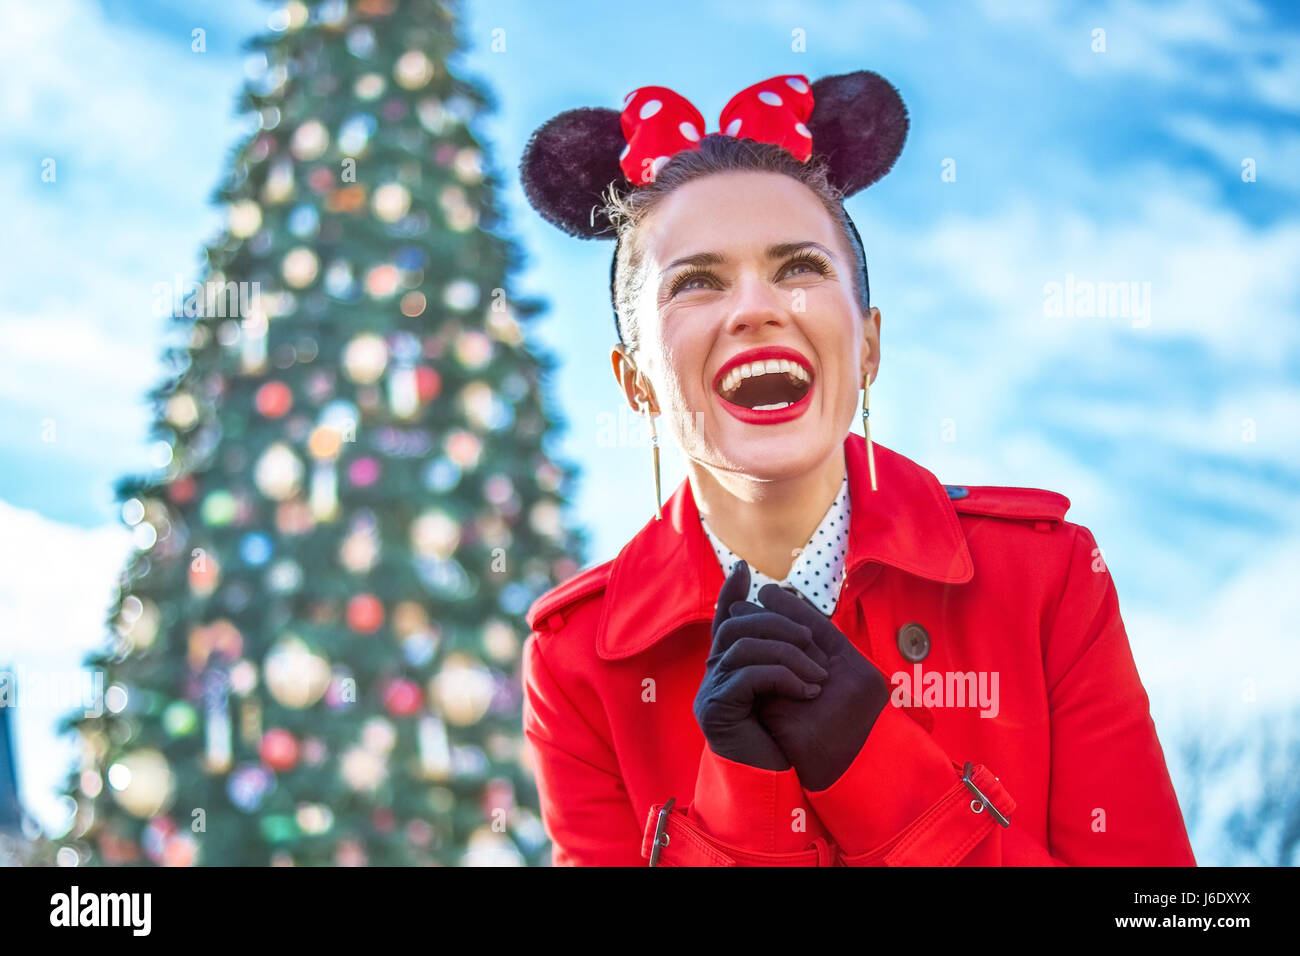 DISNEYLAND, FRANCE - DECEMBER, 8, 2016: smiling trendy woman in red trench coat in the front of big Christmas tree looking into the distance Stock Photo